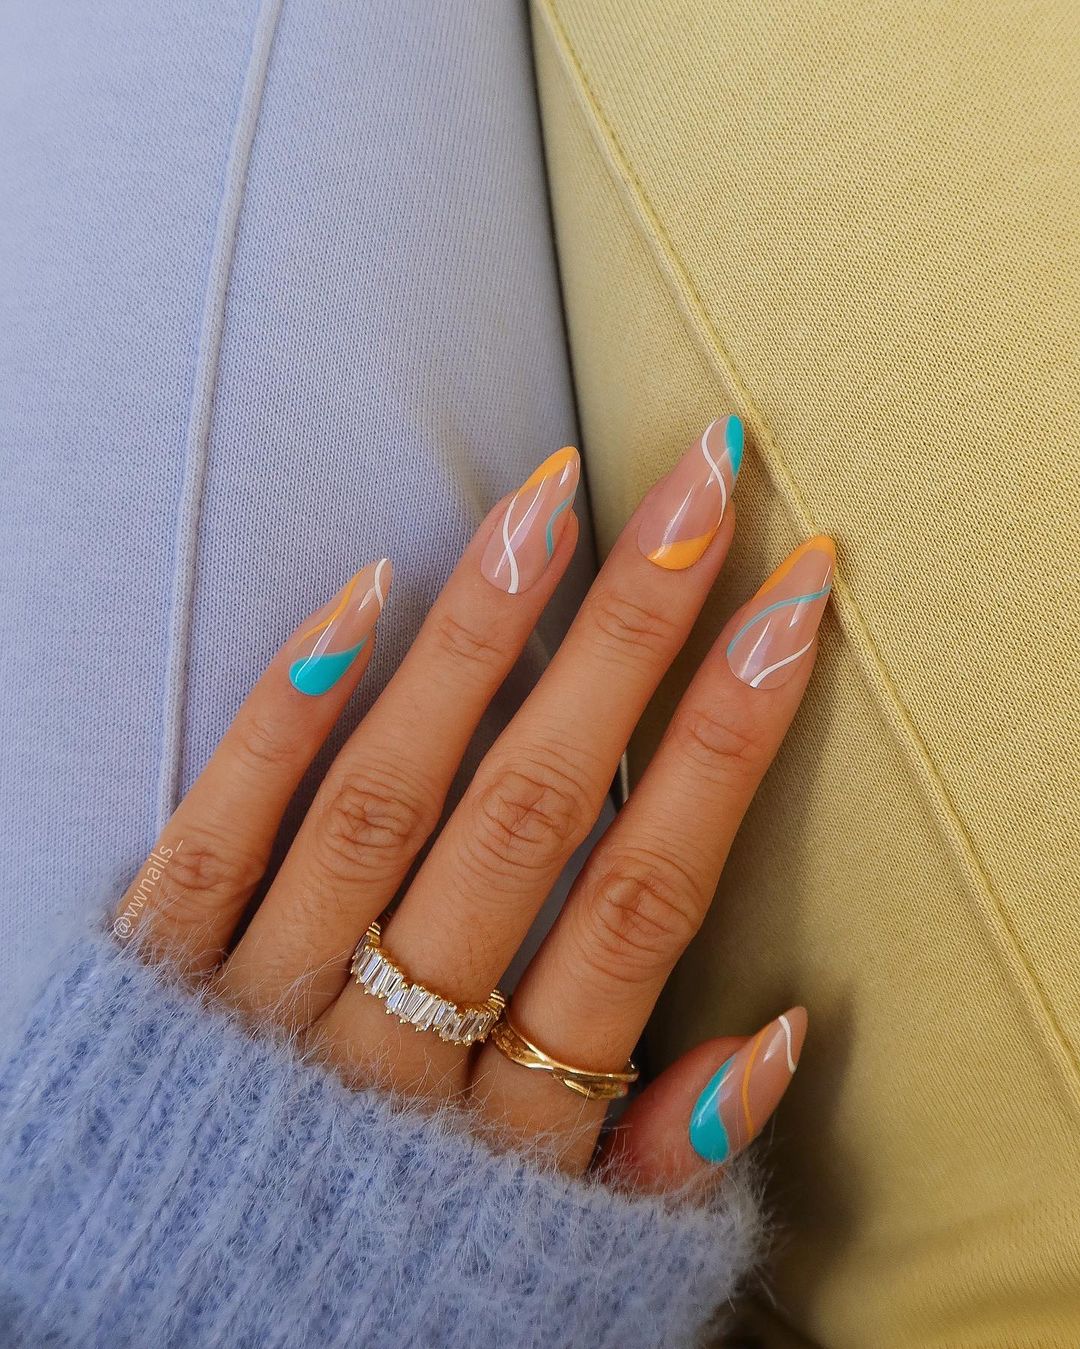 Nude Nails With Delicate White, Orange AndBlue Lines